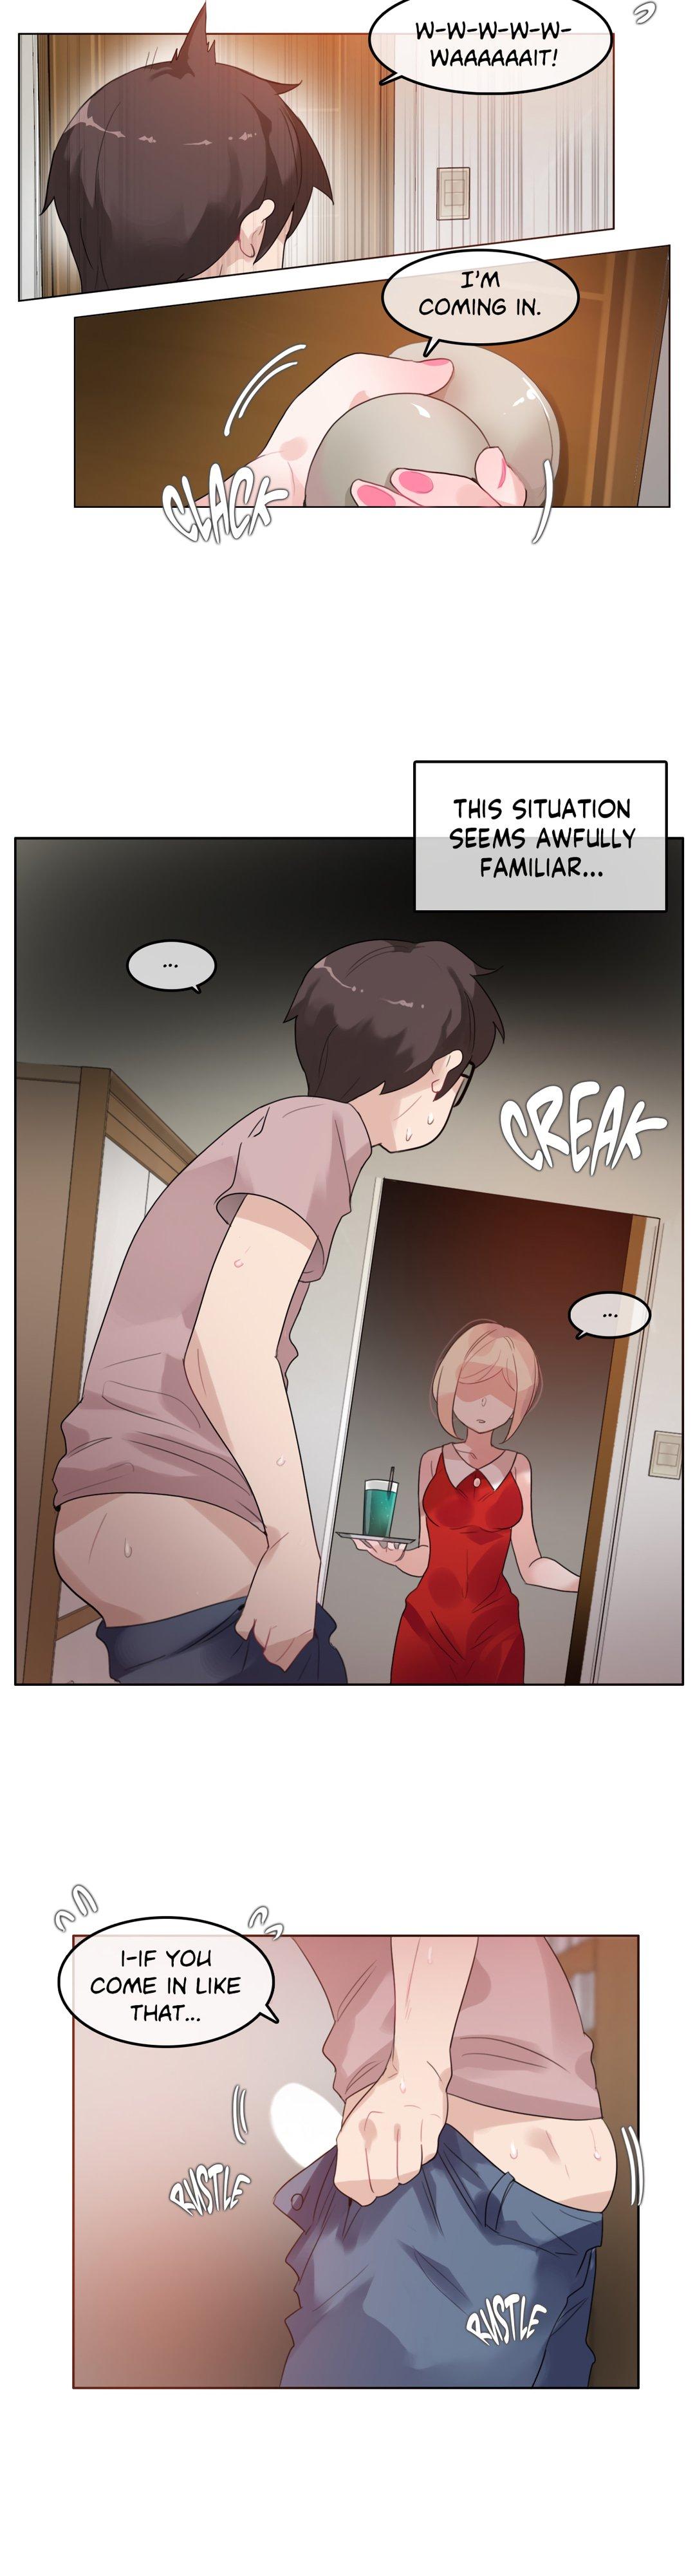 A Pervert's Daily Life Ch. 35-71 57